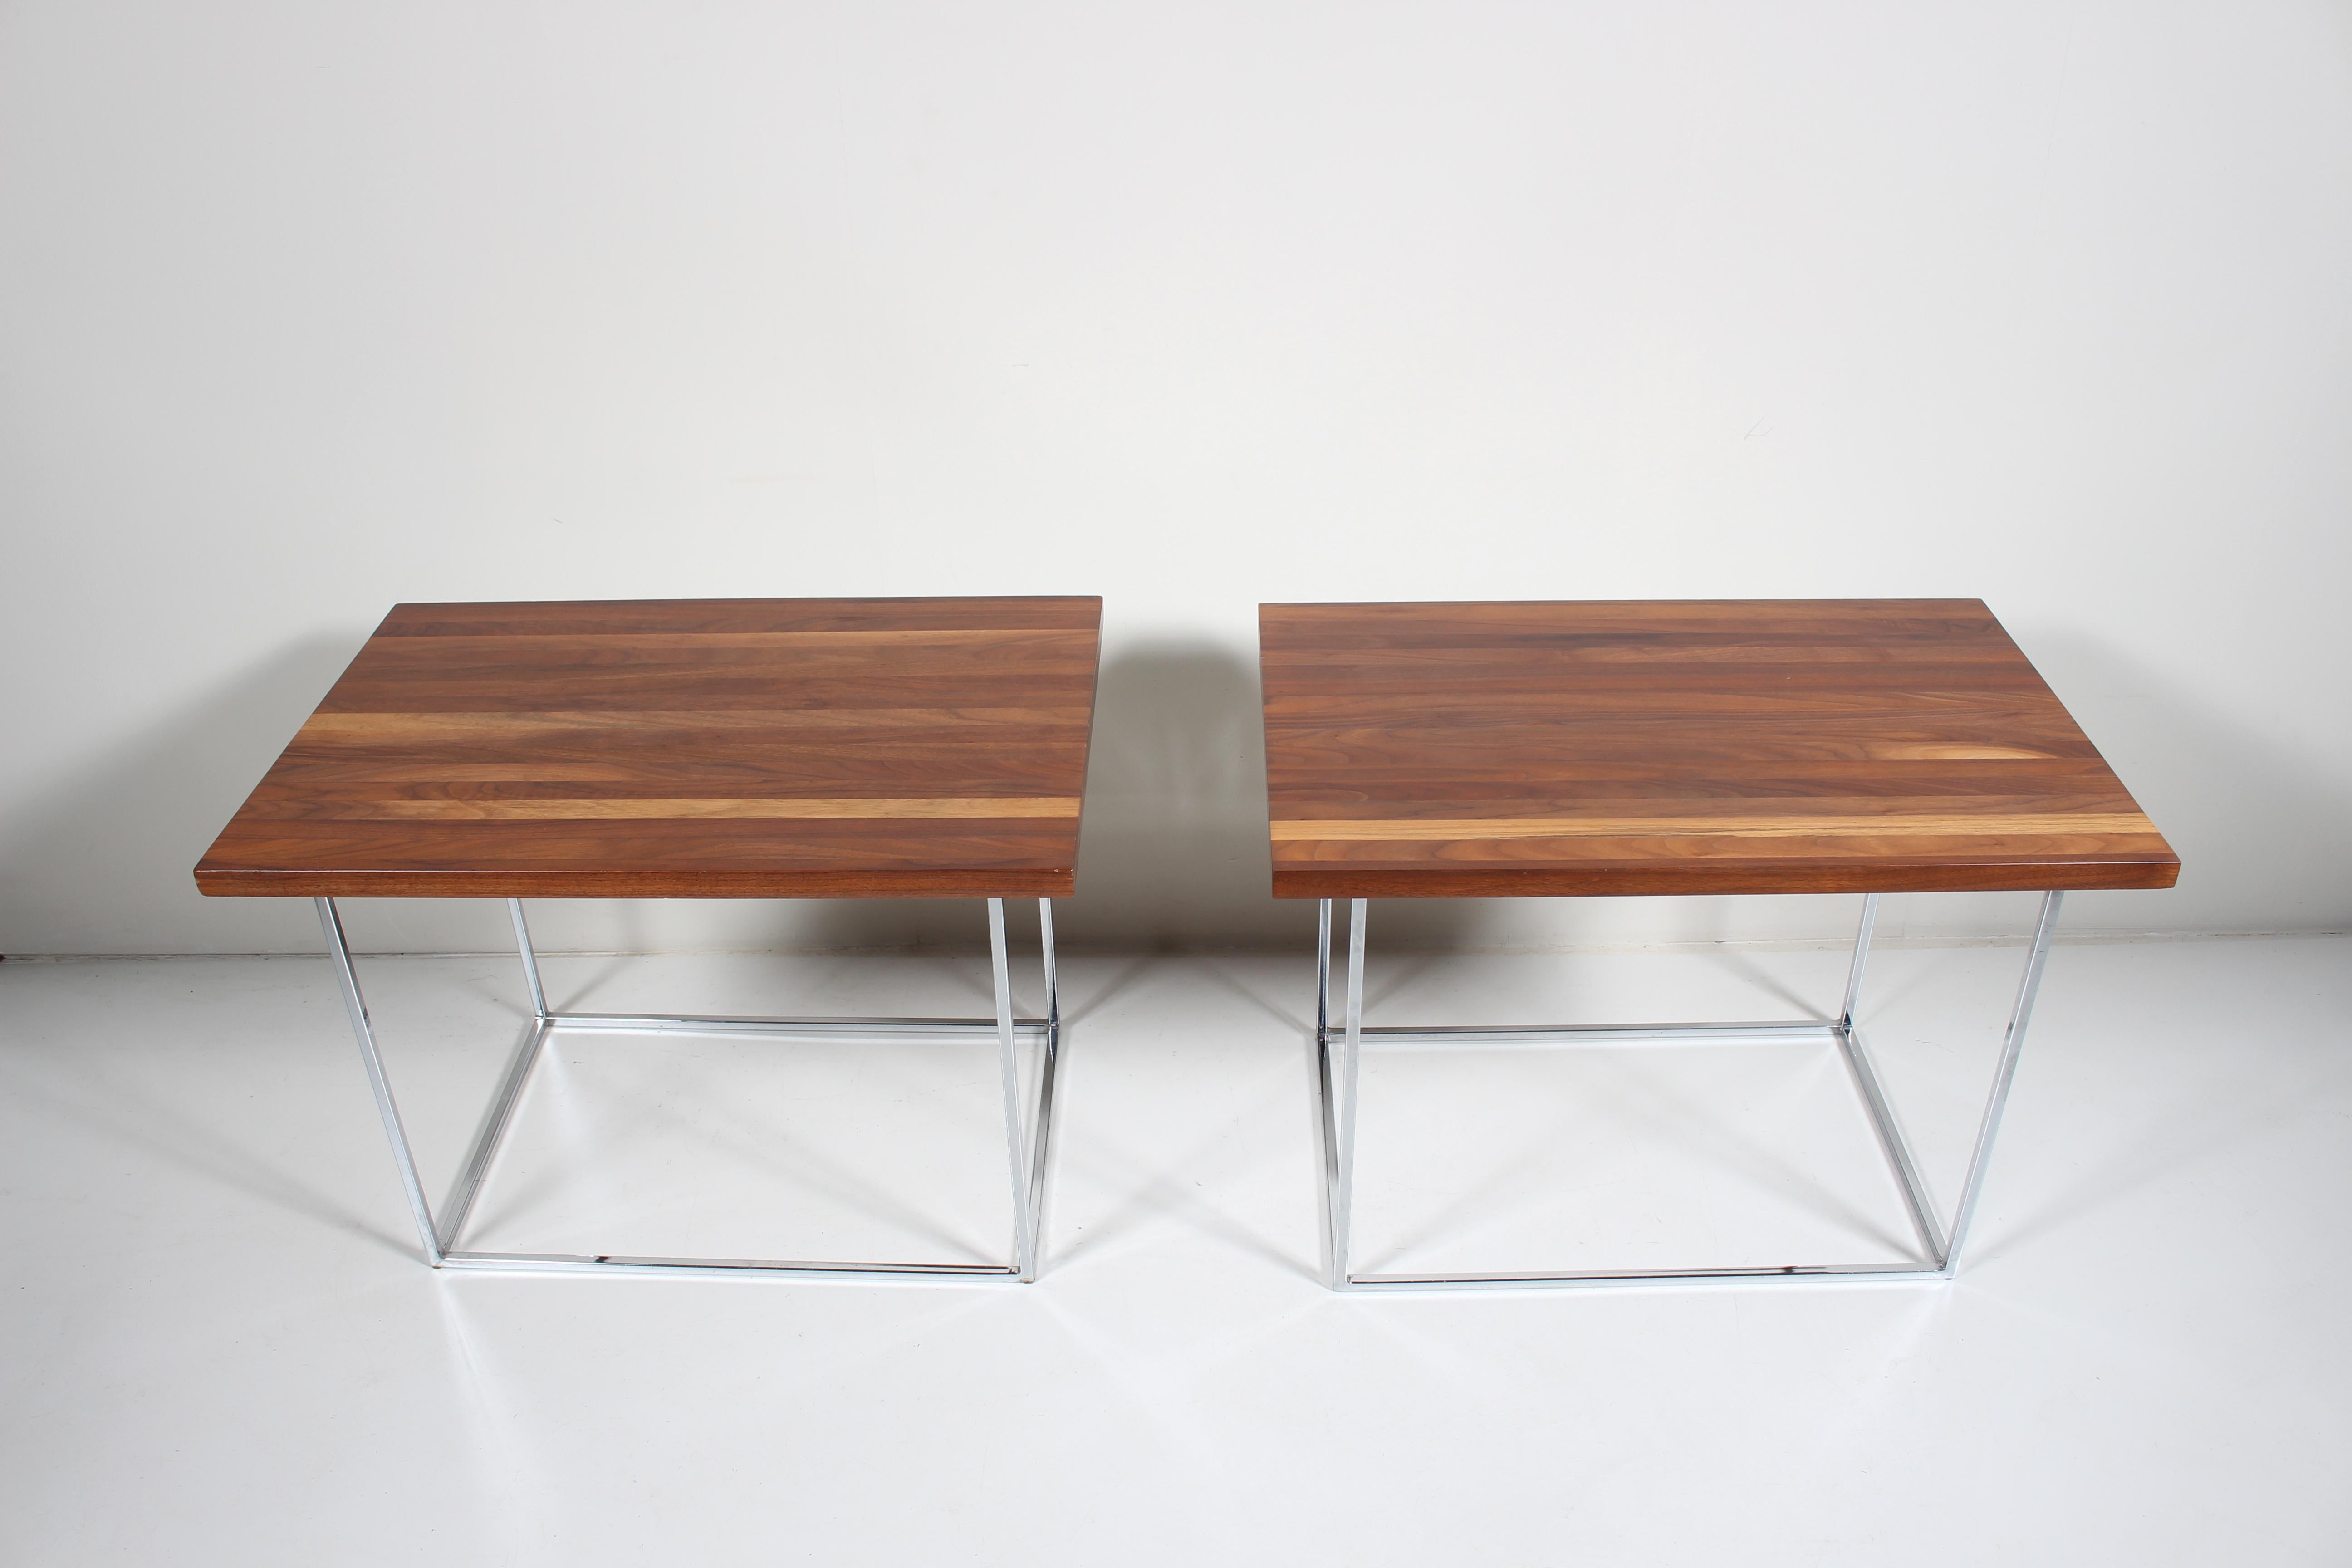 Pair of Milo Baughman for Thayer Coggin attributed Black Walnut & Chrome End Tables, Side Tables, Nightstands, circa 1970. Featuring open rectangular interior (16 x 24.5 x 19.75H) Chrome frameworks, reflective (.5W x .5D) Chrome tubes with thick,